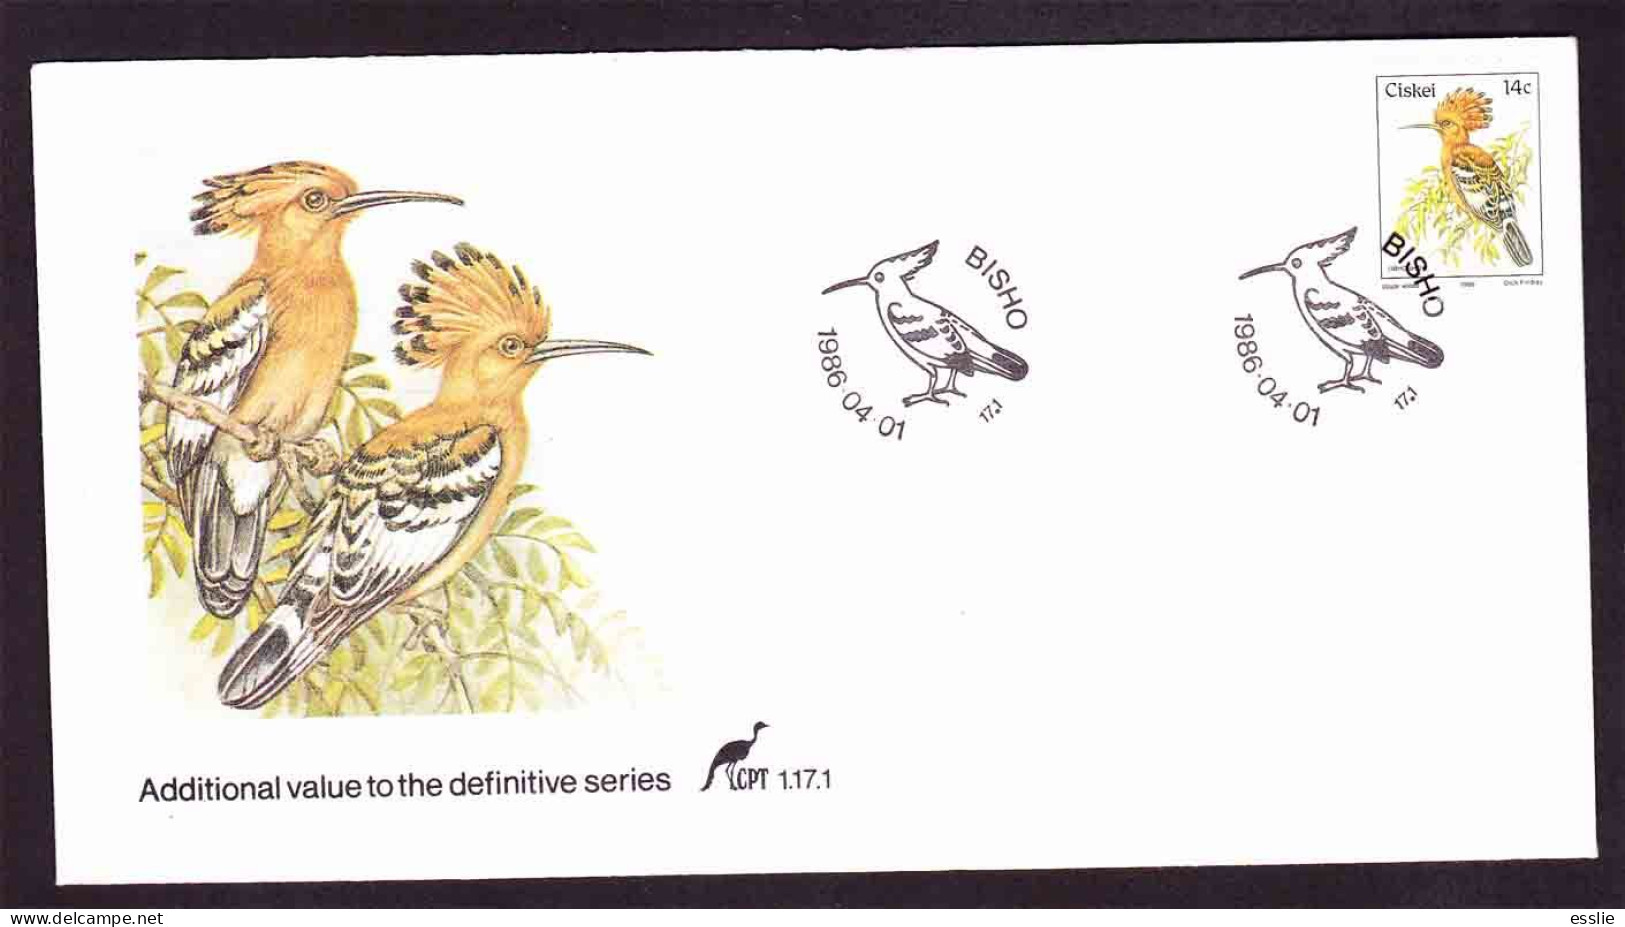 Ciskei - 1986 (1981) - Birds First Definitive - Additional Value - Hoopoe - First Day Cover - Small - Coucous, Touracos